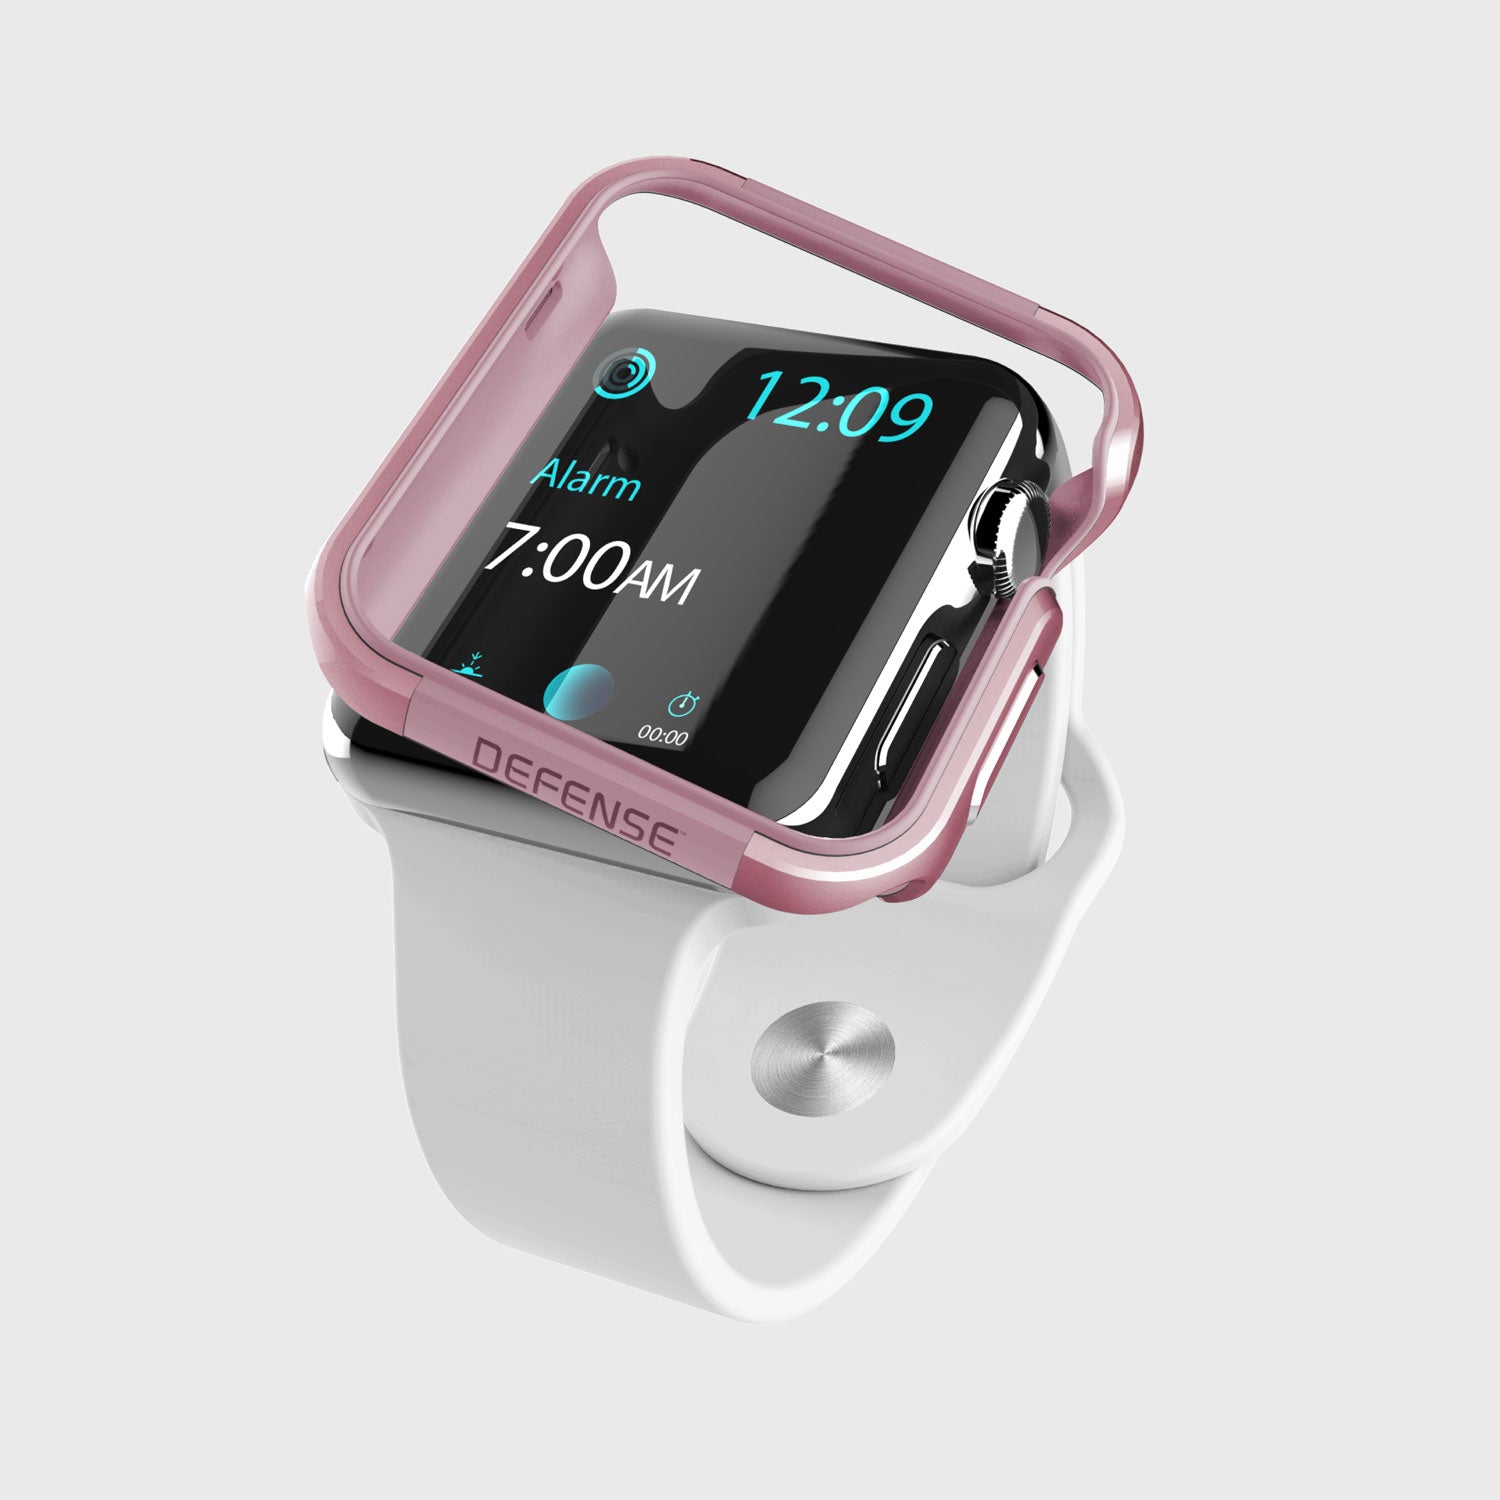 A pink Raptic Apple Watch EDGE with a machined anodized aluminum bumper that protects it is shown on a white background.